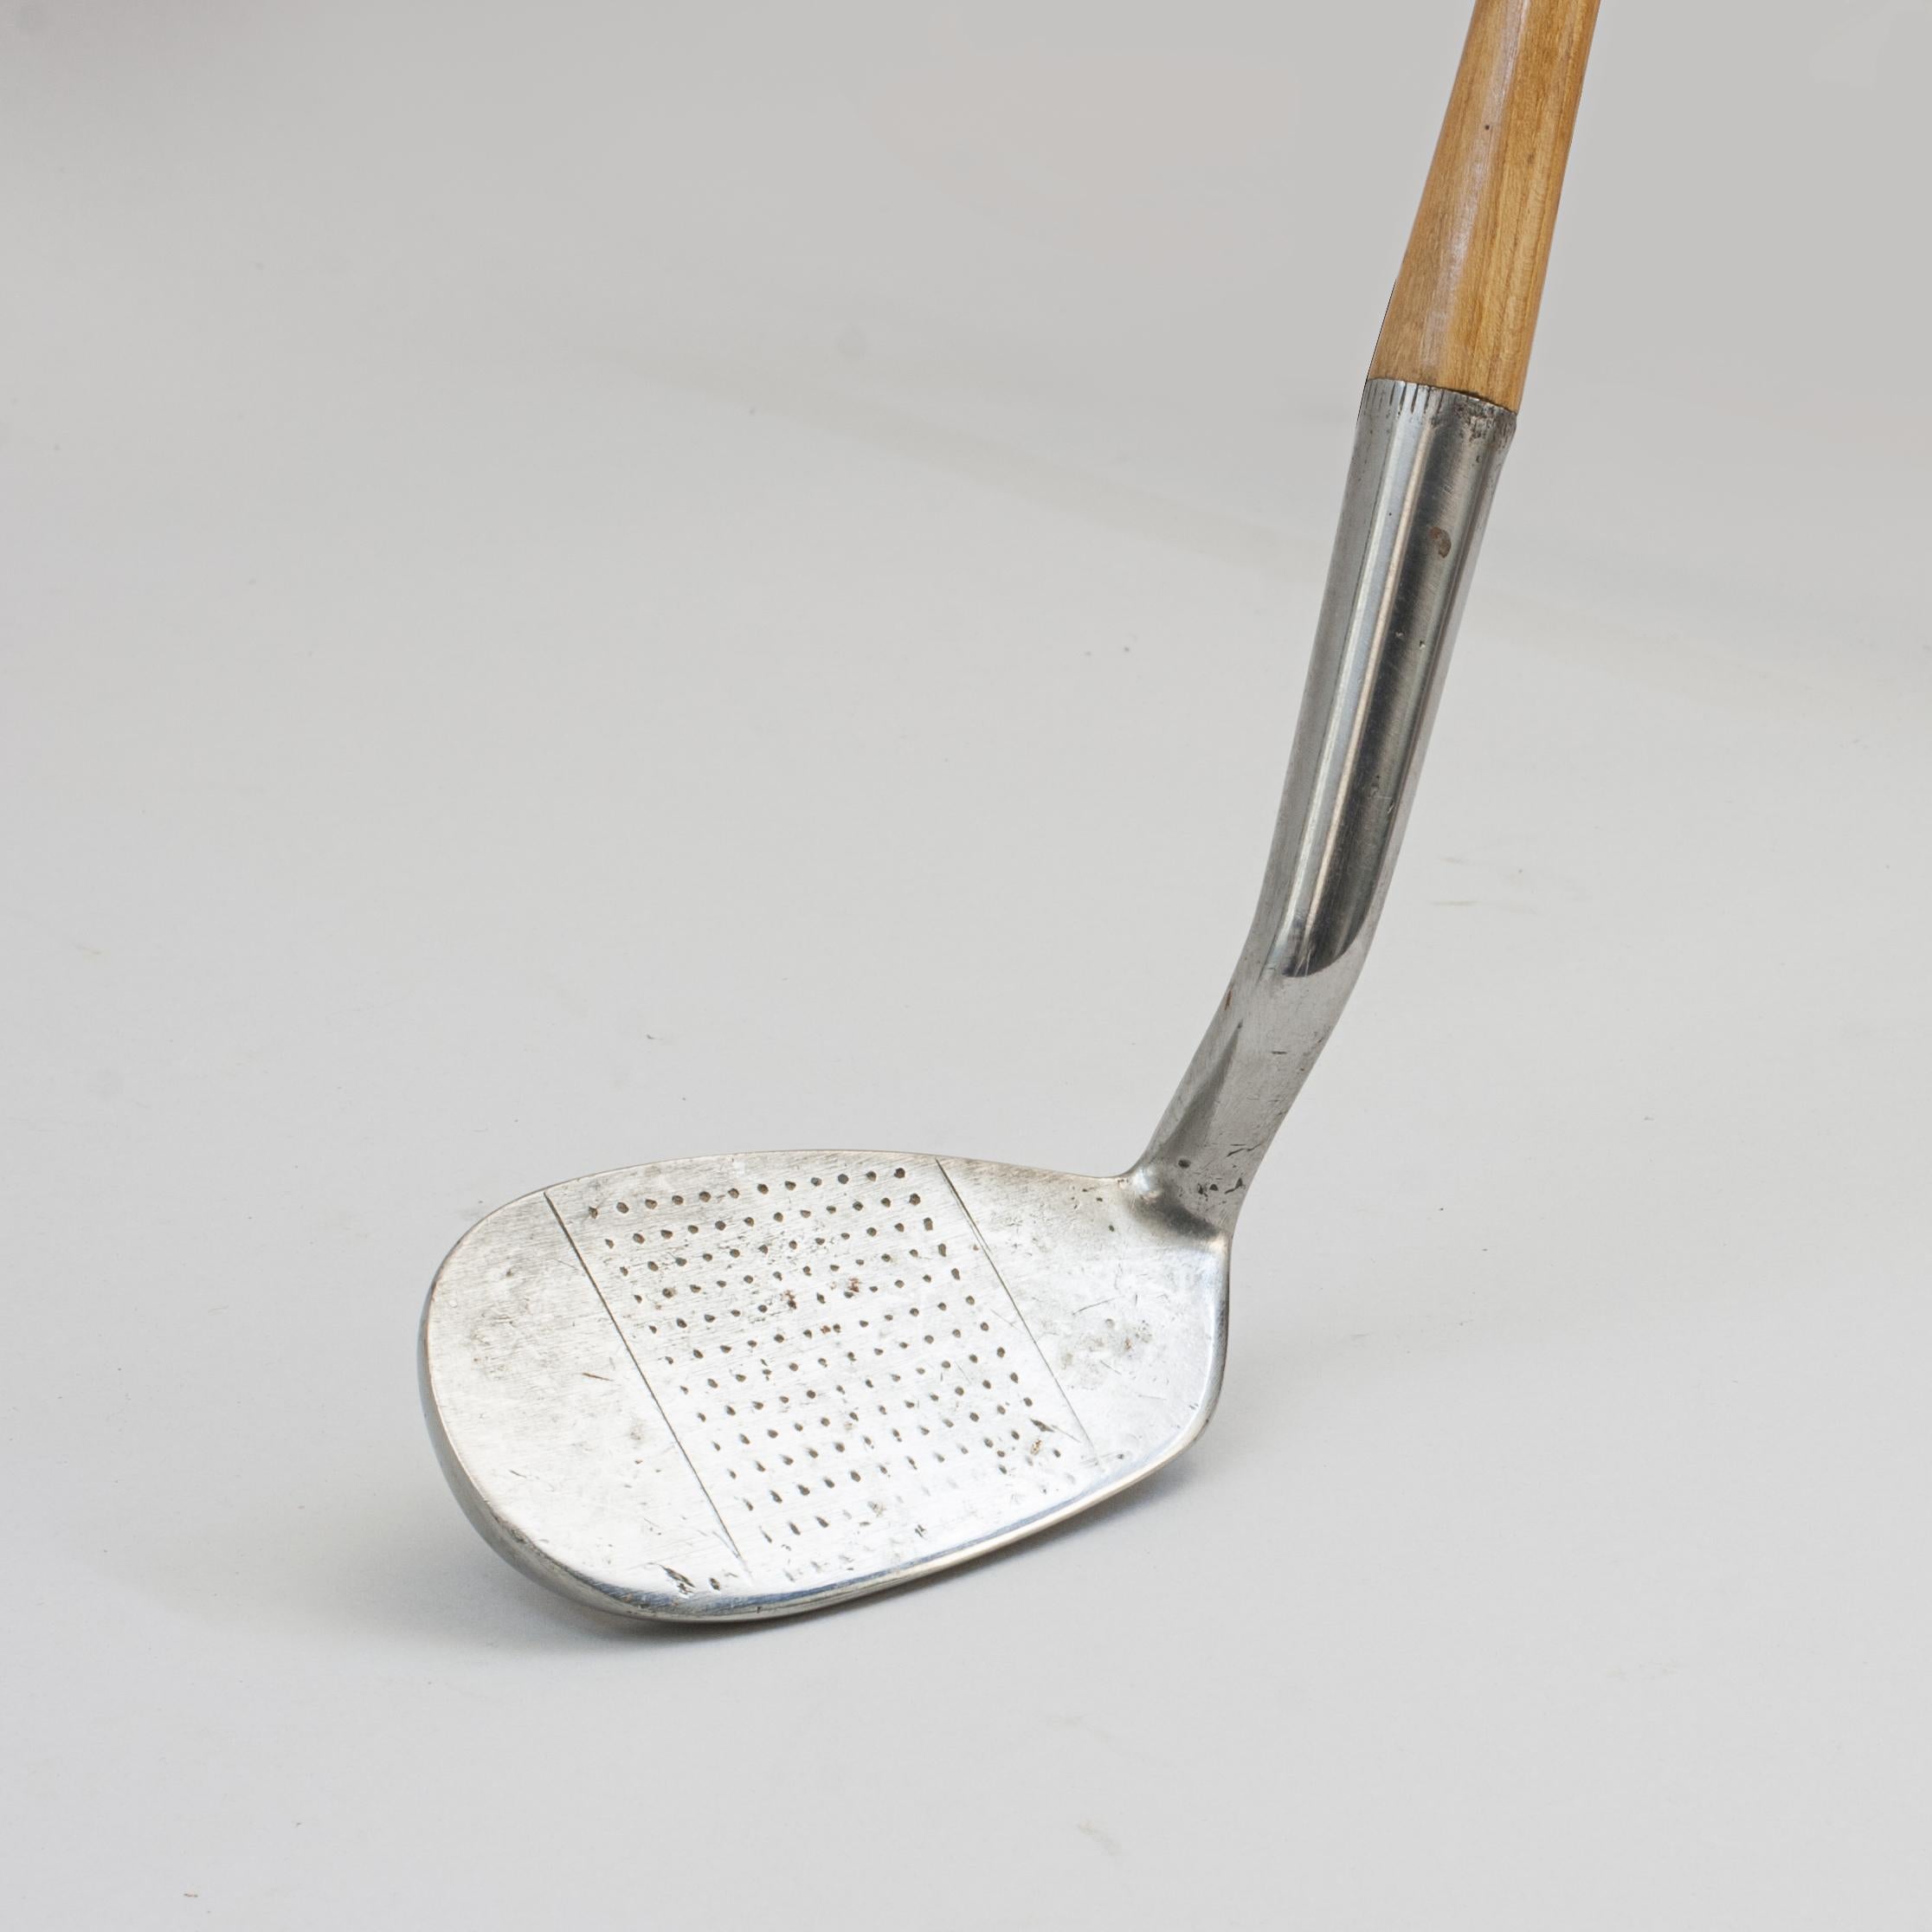 Mashie-Niblick golf club by Gibson of Kinghorn.
A good Mashie-Niblick iron (Smith's model) made by Gibson of Kinghorn with a hickory shaft and suede leather grip. The head with hand punched dot face markings and the rear clearly stamped with the